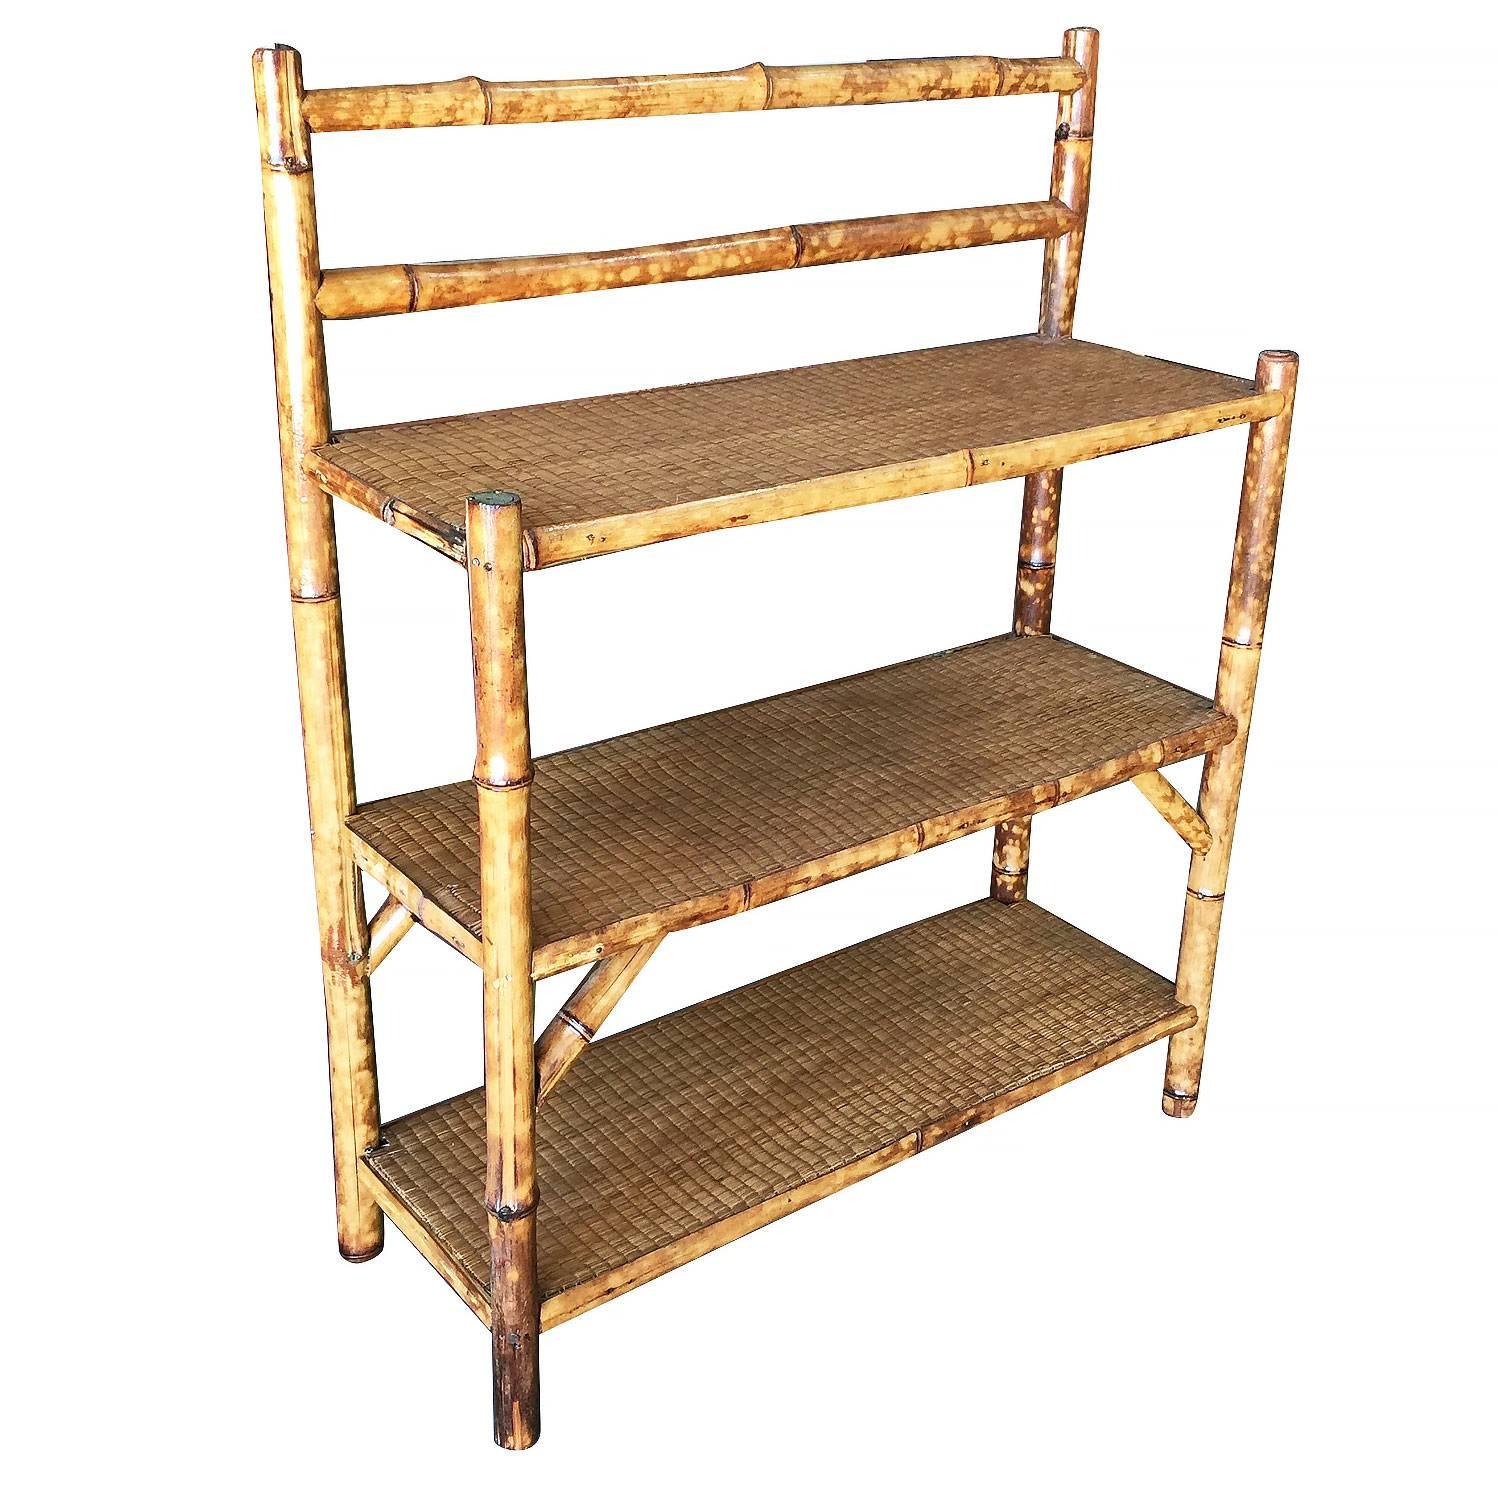 Antique three-tier tiger bamboo shelve or rack with rice mat top.


Restored to new for you.

All rattan, bamboo and wicker furniture has been painstakingly refurbished to the highest standards with the best materials. All refinishing is done by